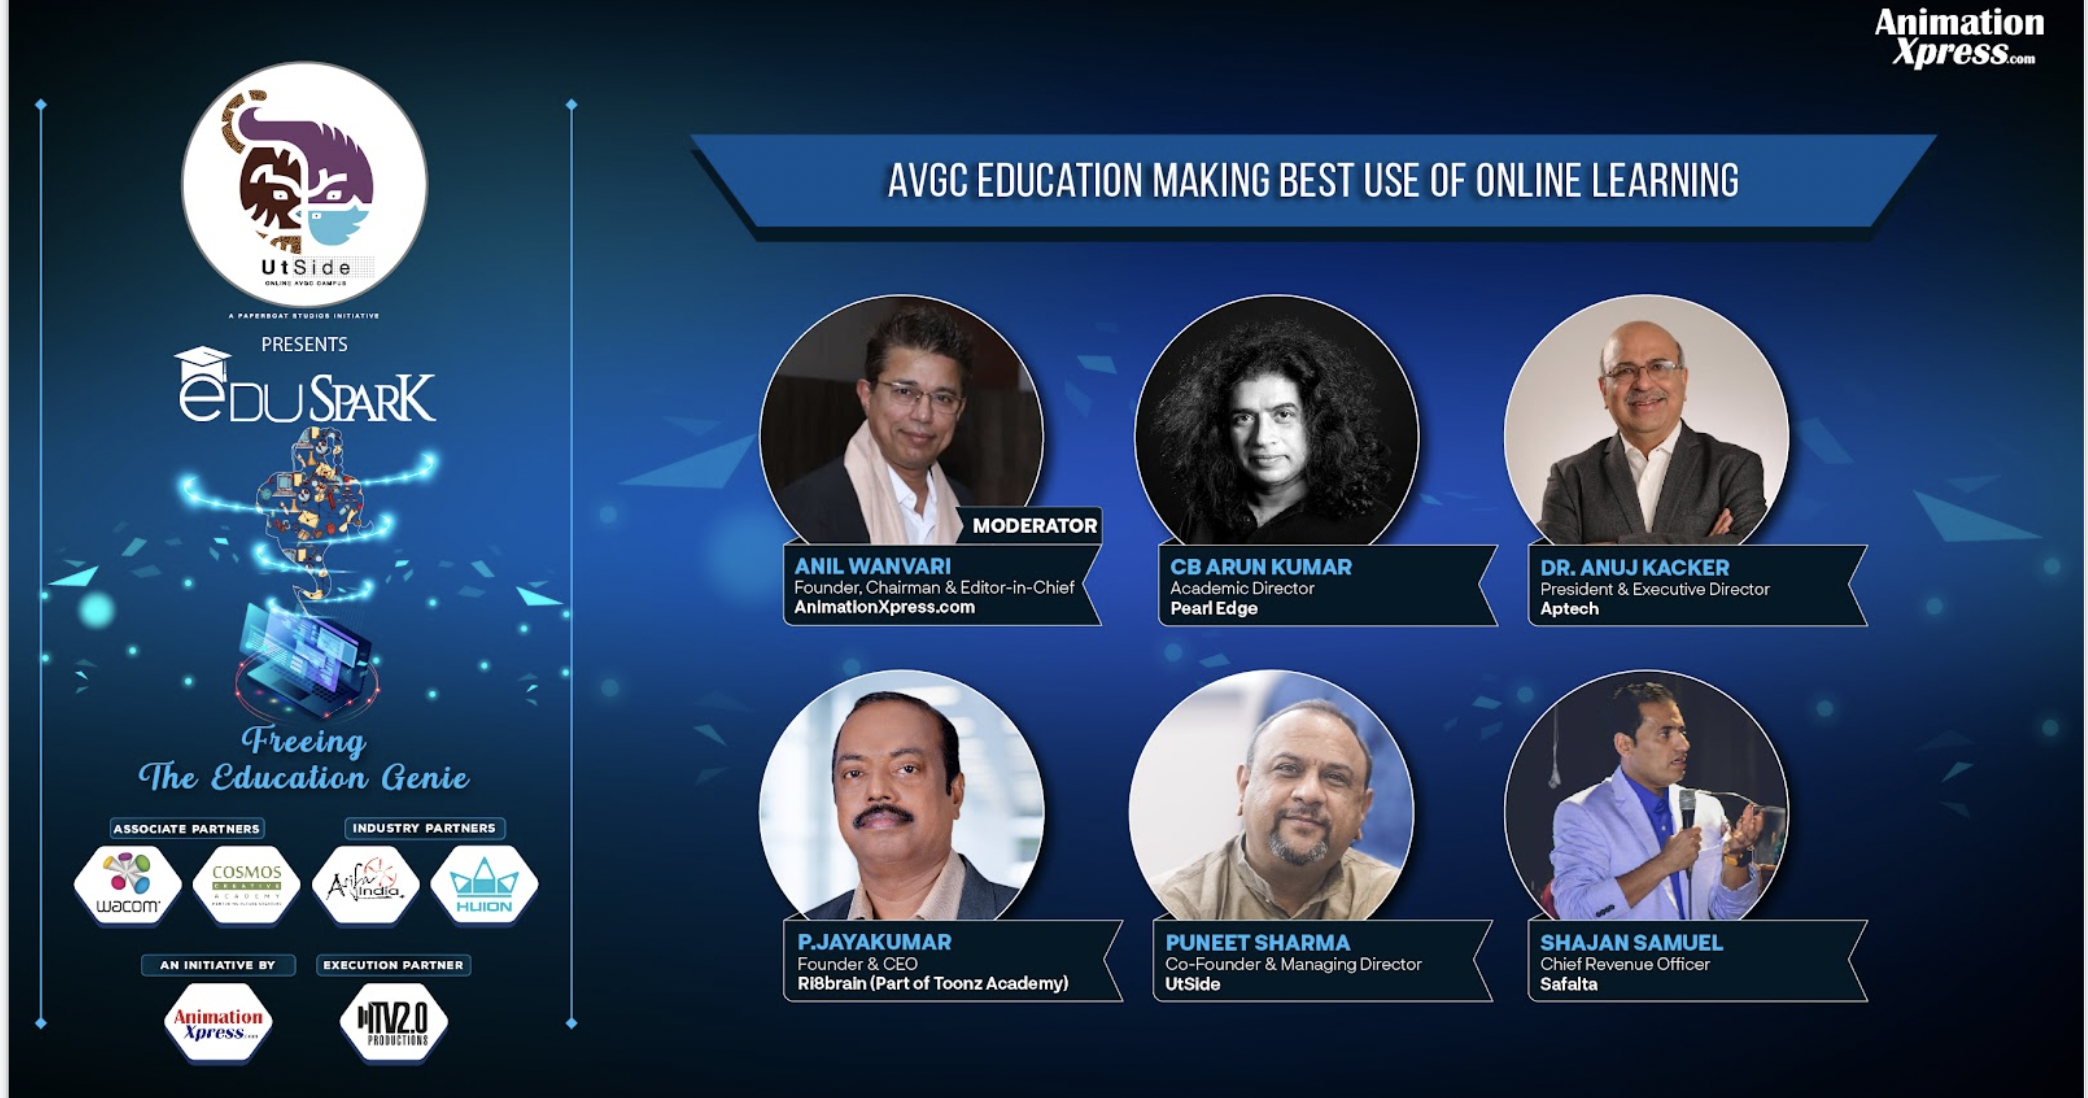 EduSpark Summit 2022: Experts talk about how AVGC industry is making best use of online learning